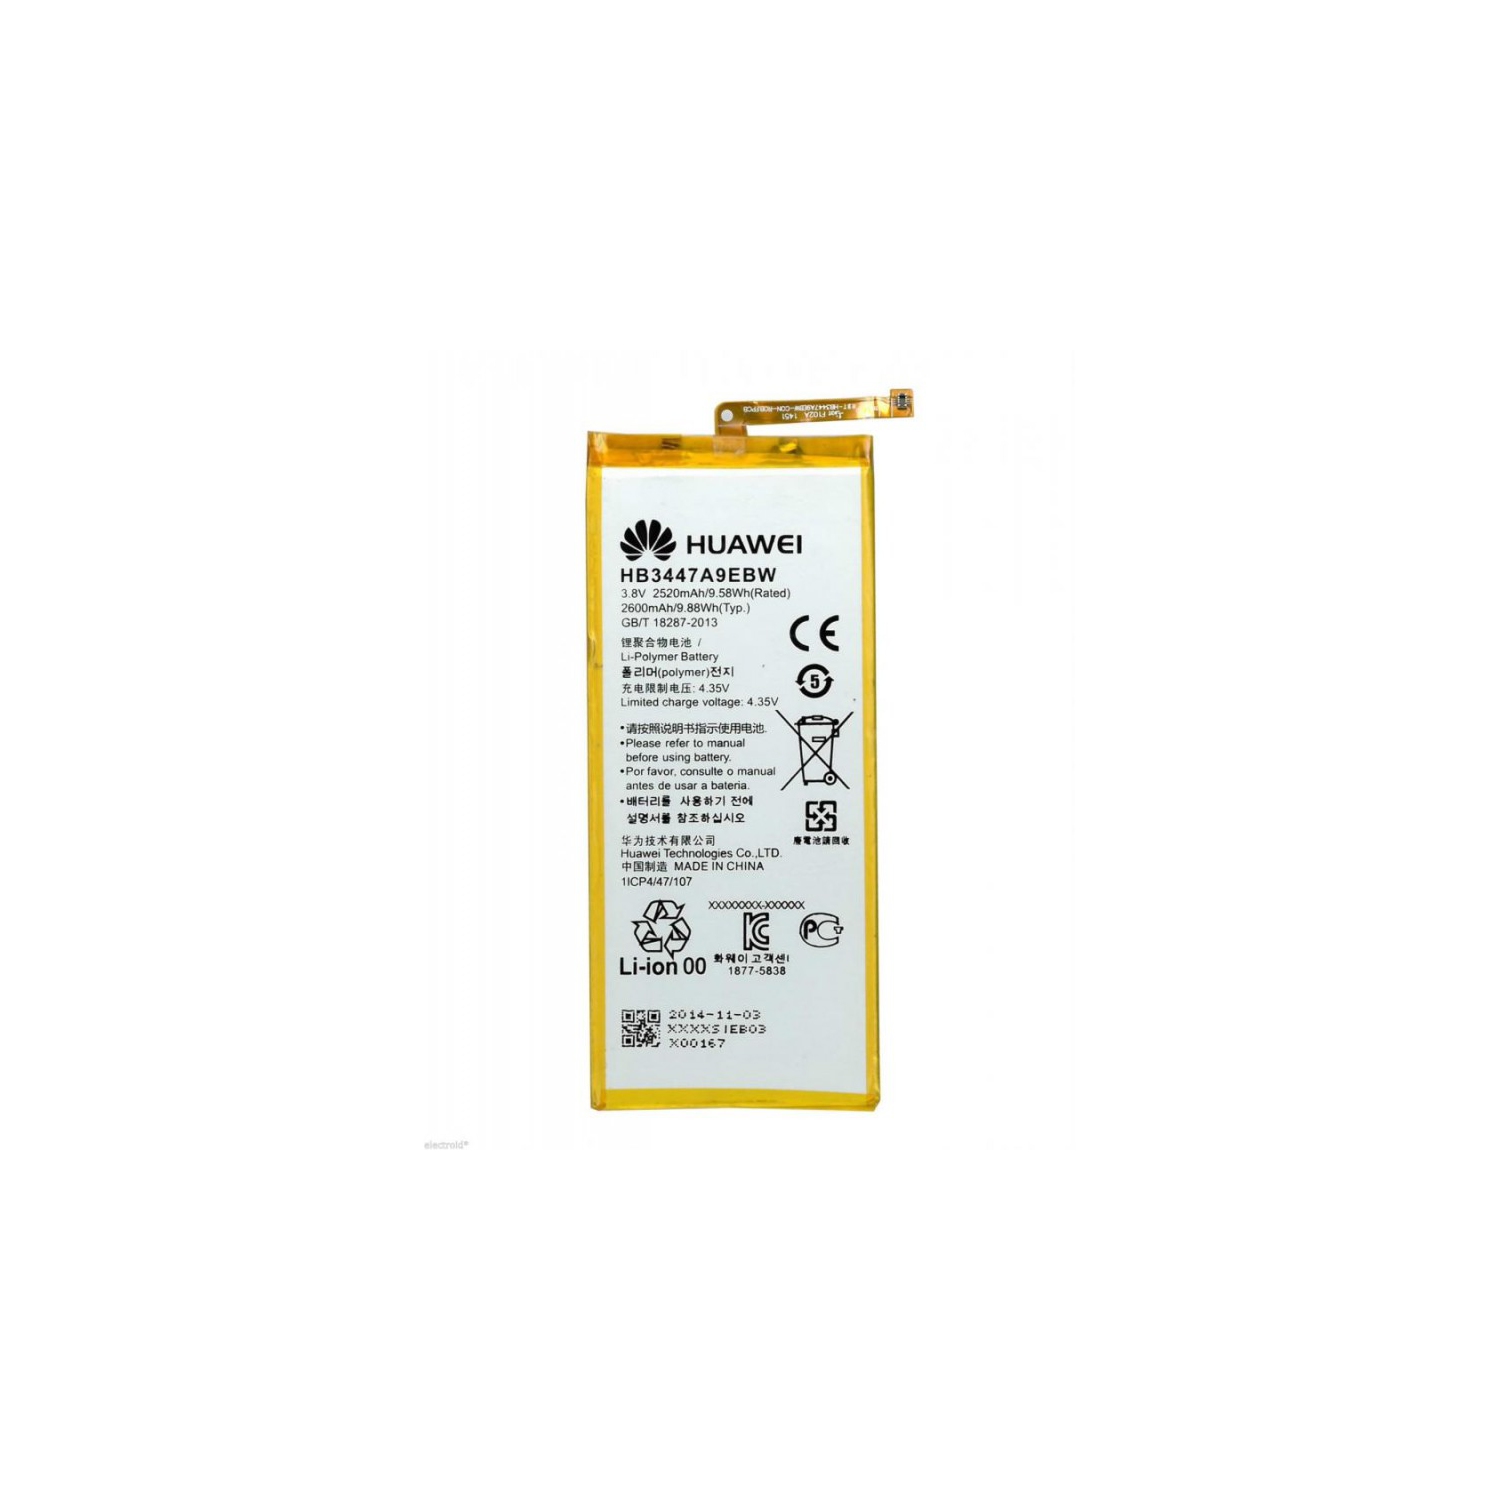 Replacement Battery for Huawei Ascend P8 Lite / GR3 / Y3 / Y5, HB3742A0EZC+